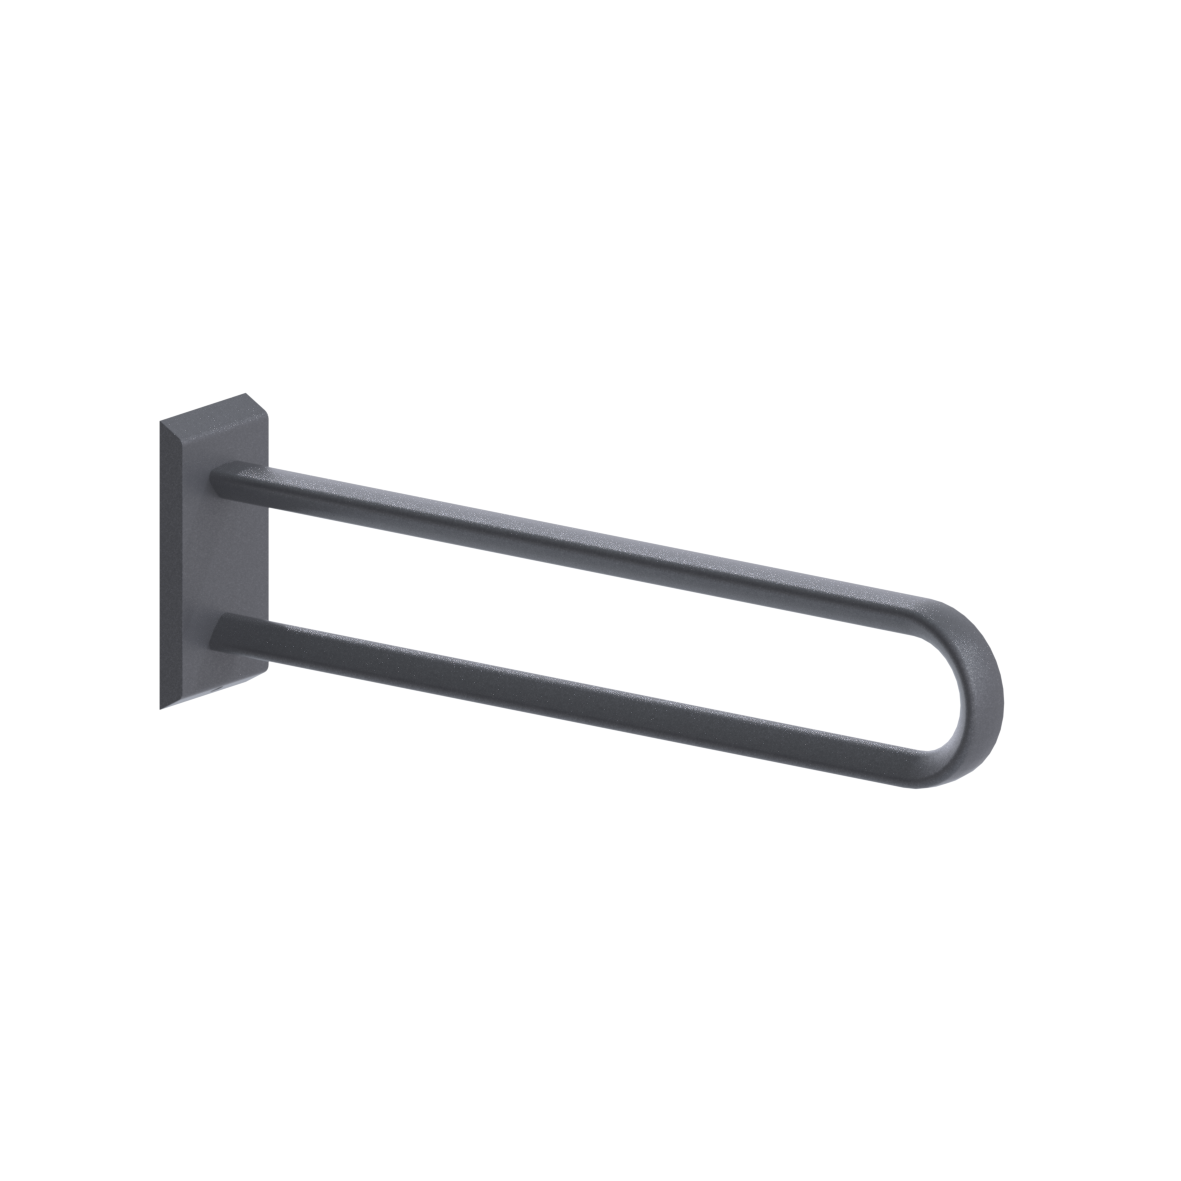 Cavere Care Wall support rail vario, with base plate, left and right, L = 725 mm, Cavere Metallic anthracite